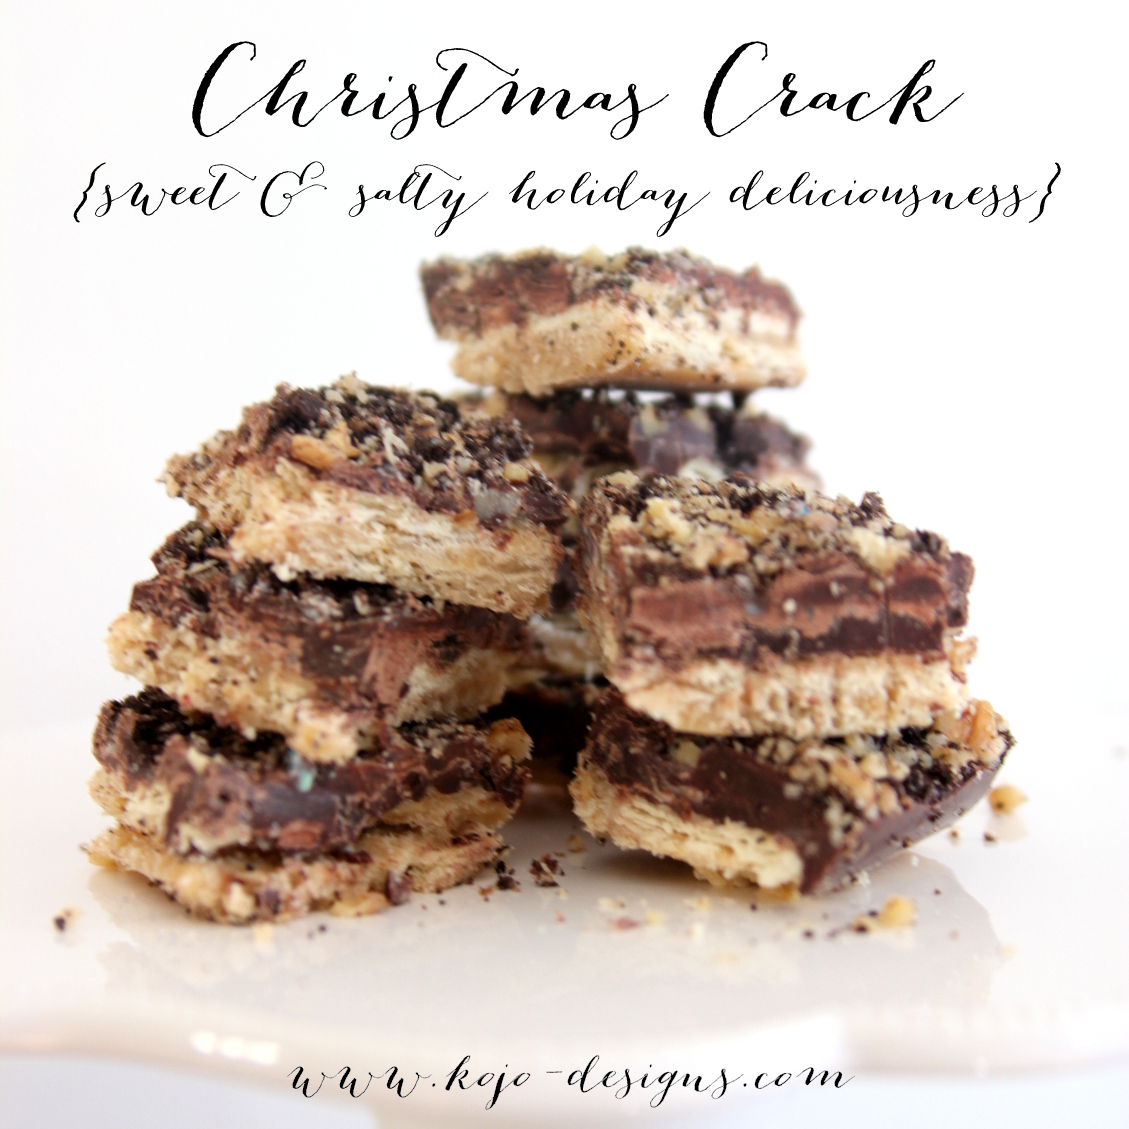 sweet & salty holiday deliciousness (aka- Christmas crack)